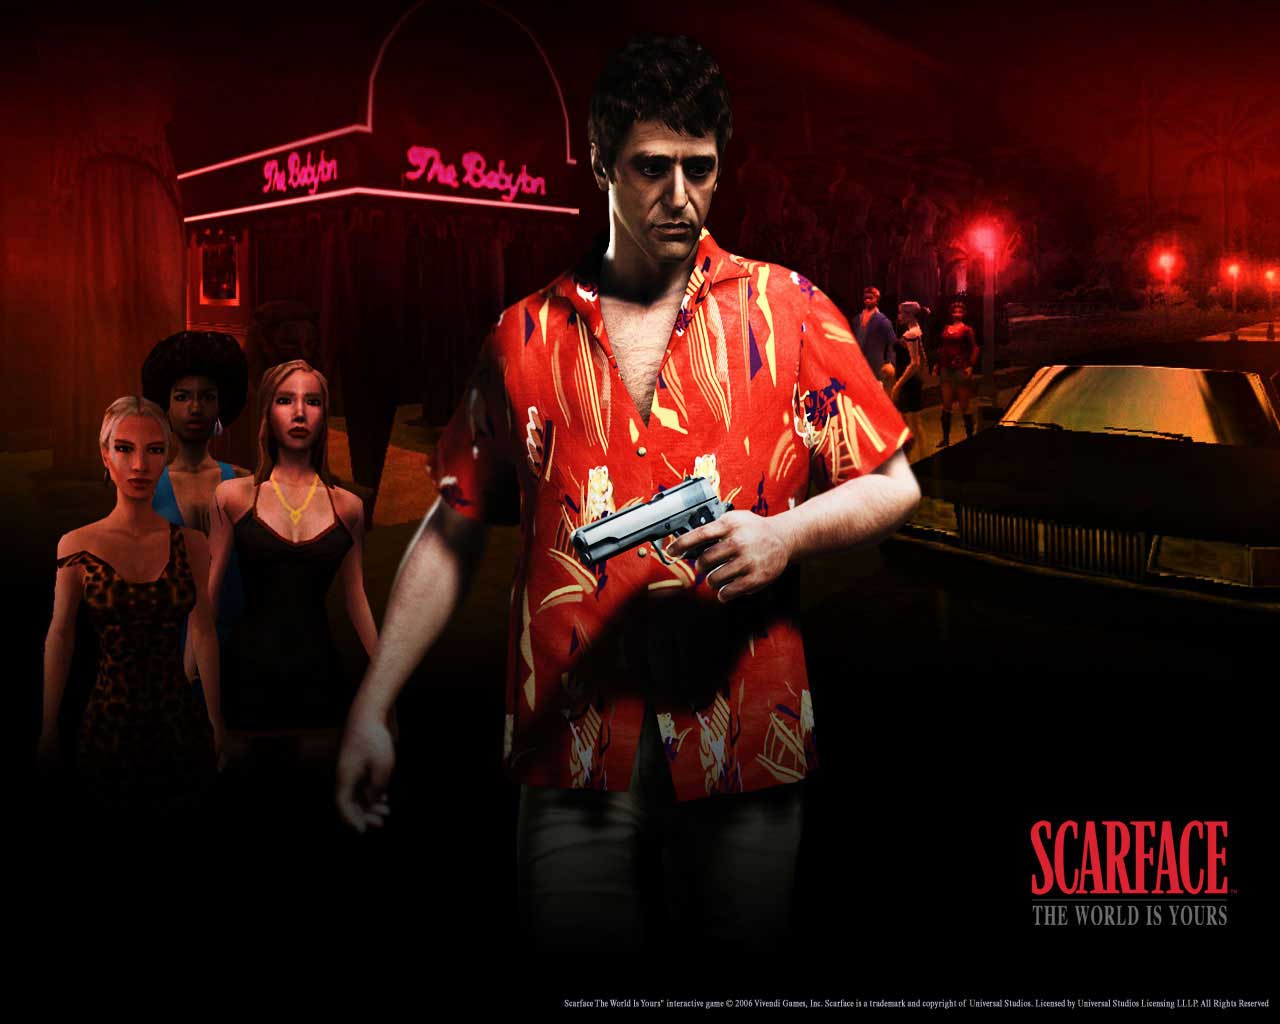 Scarface  The World is Yours wallpapers  Scarface  The World is Yours  stock photos